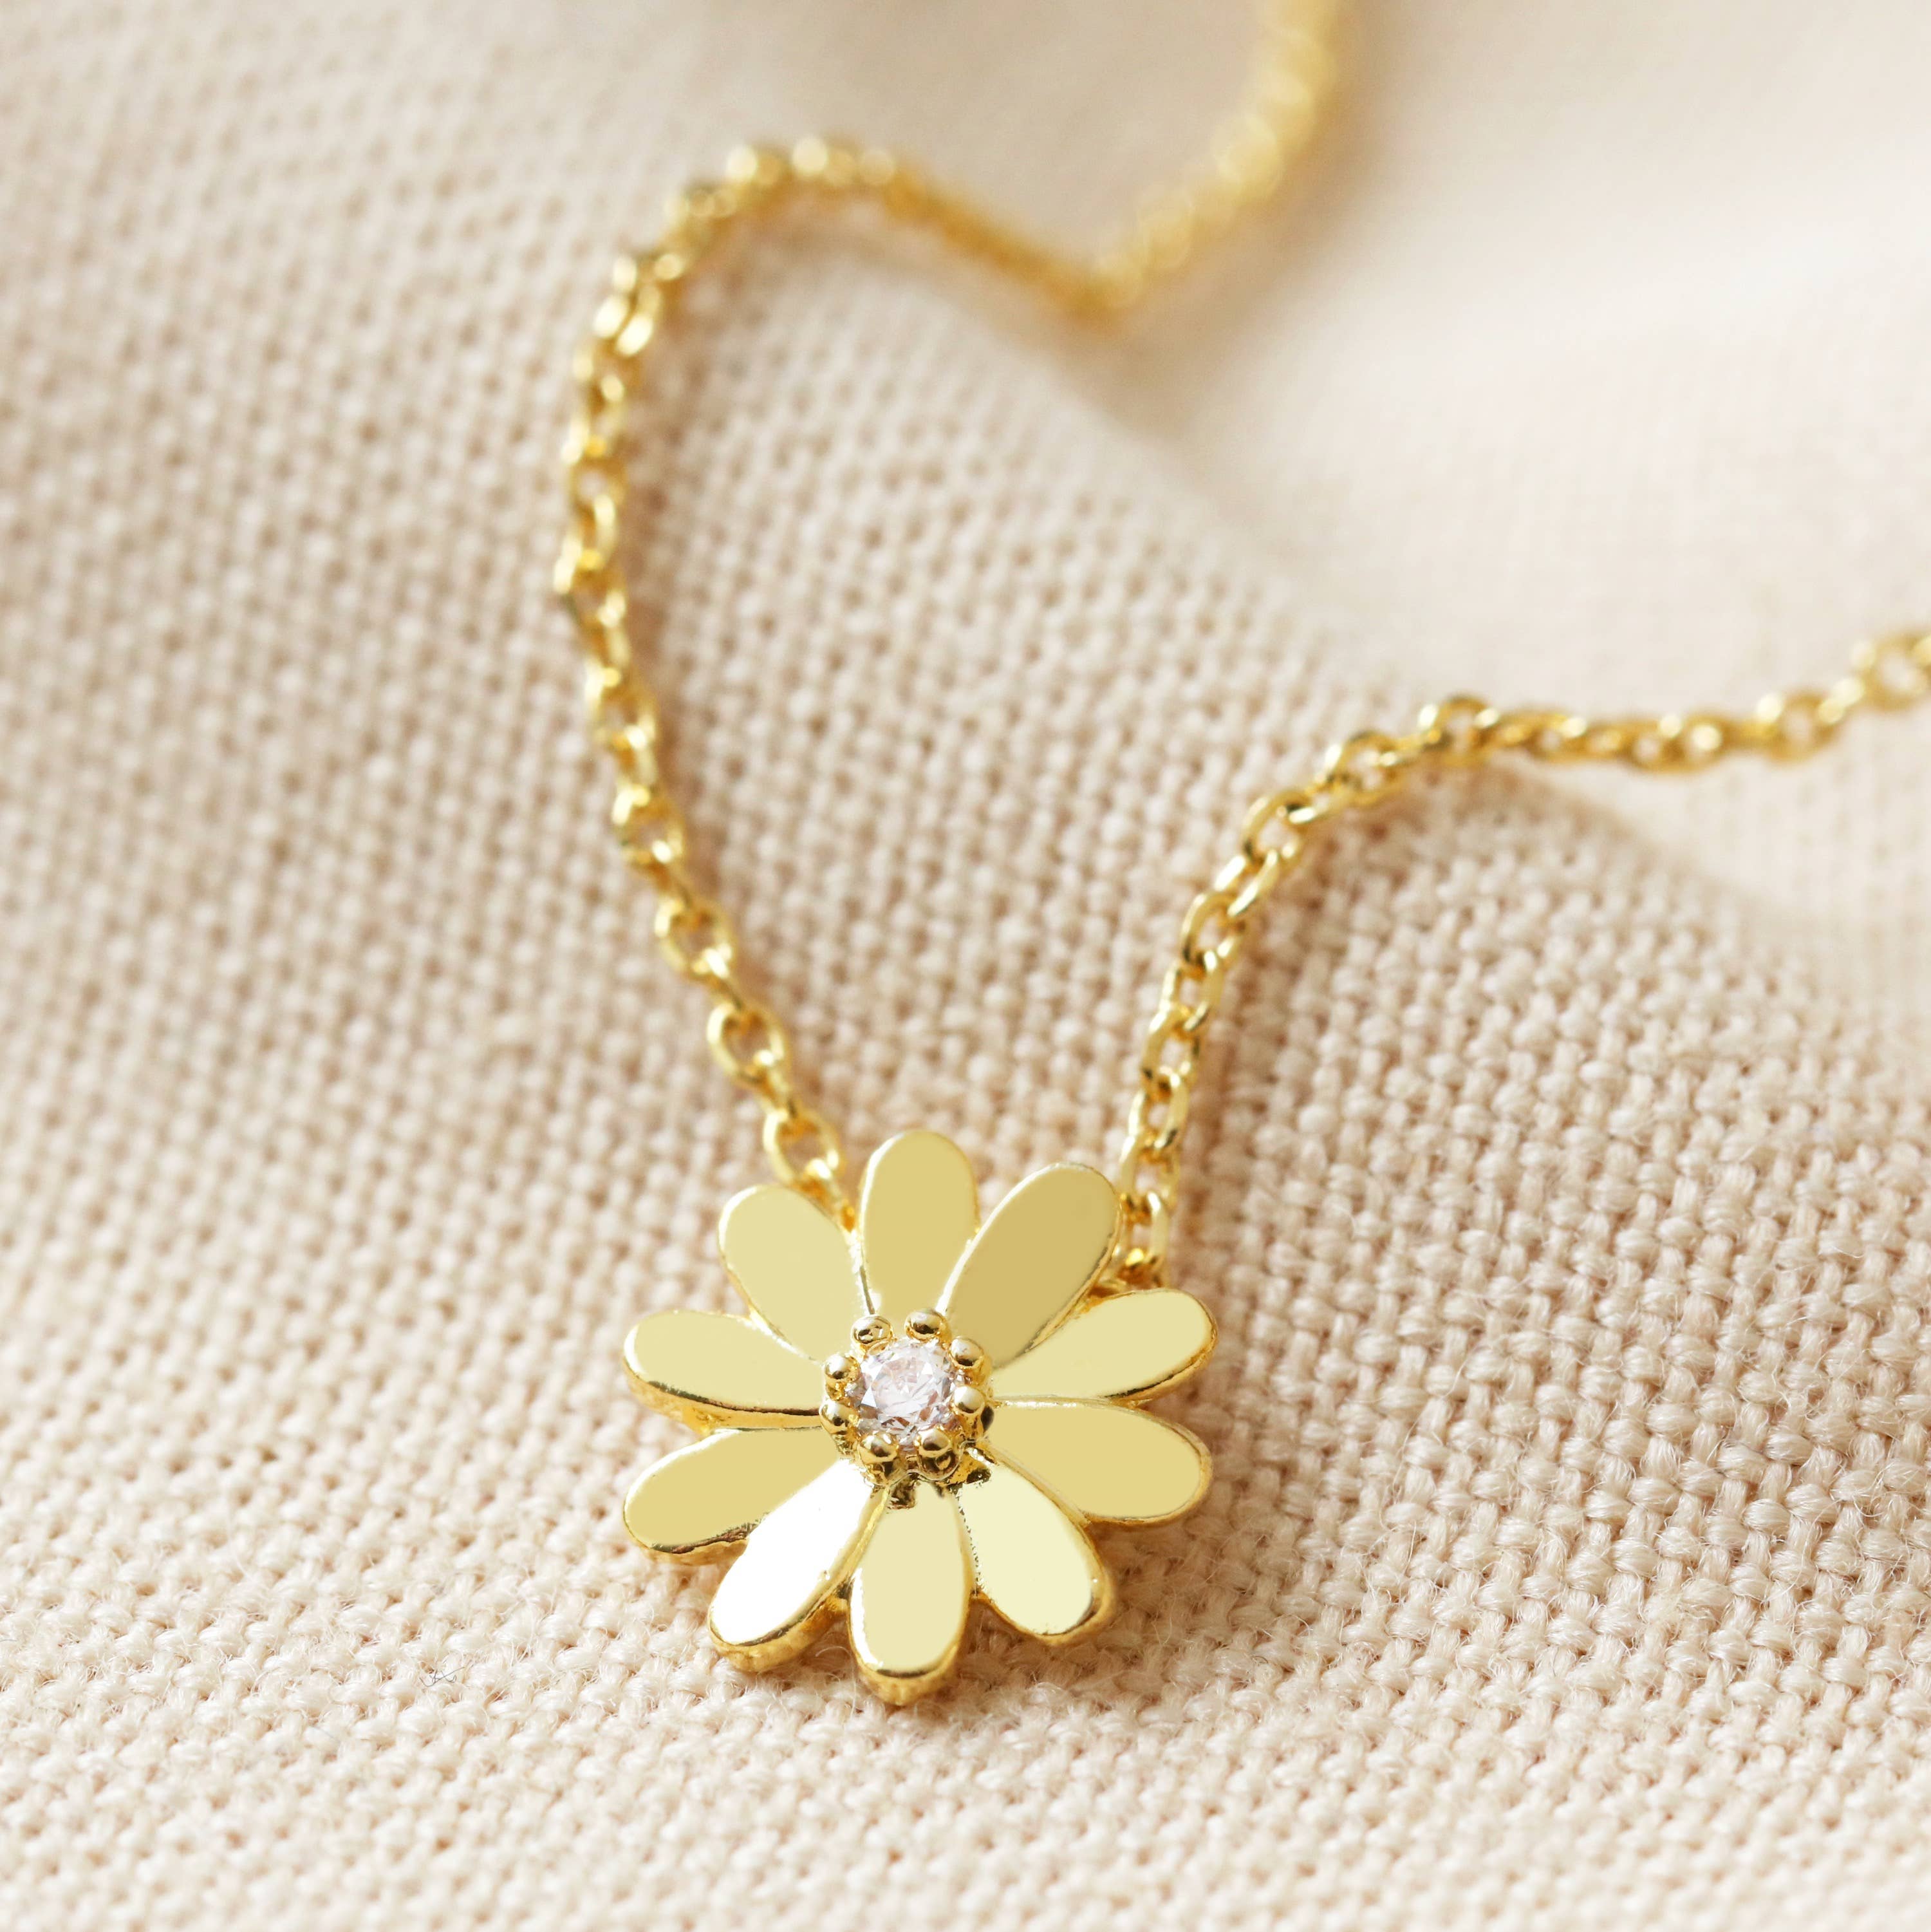 Daisy Charm Necklace in Gold Lisa Angel Jewellery Collection Cute Floral Dainty